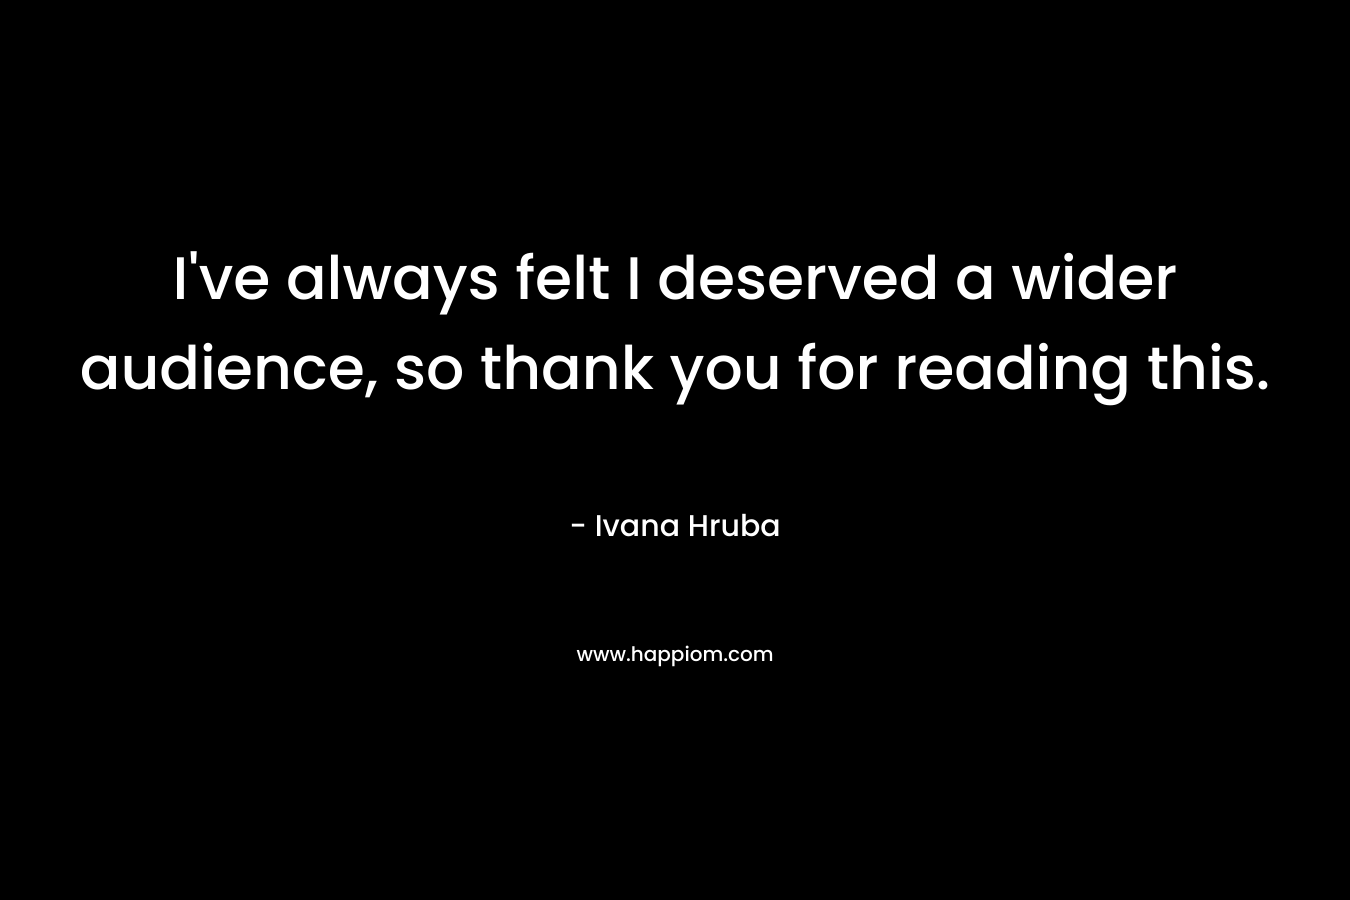 I’ve always felt I deserved a wider audience, so thank you for reading this. – Ivana Hruba